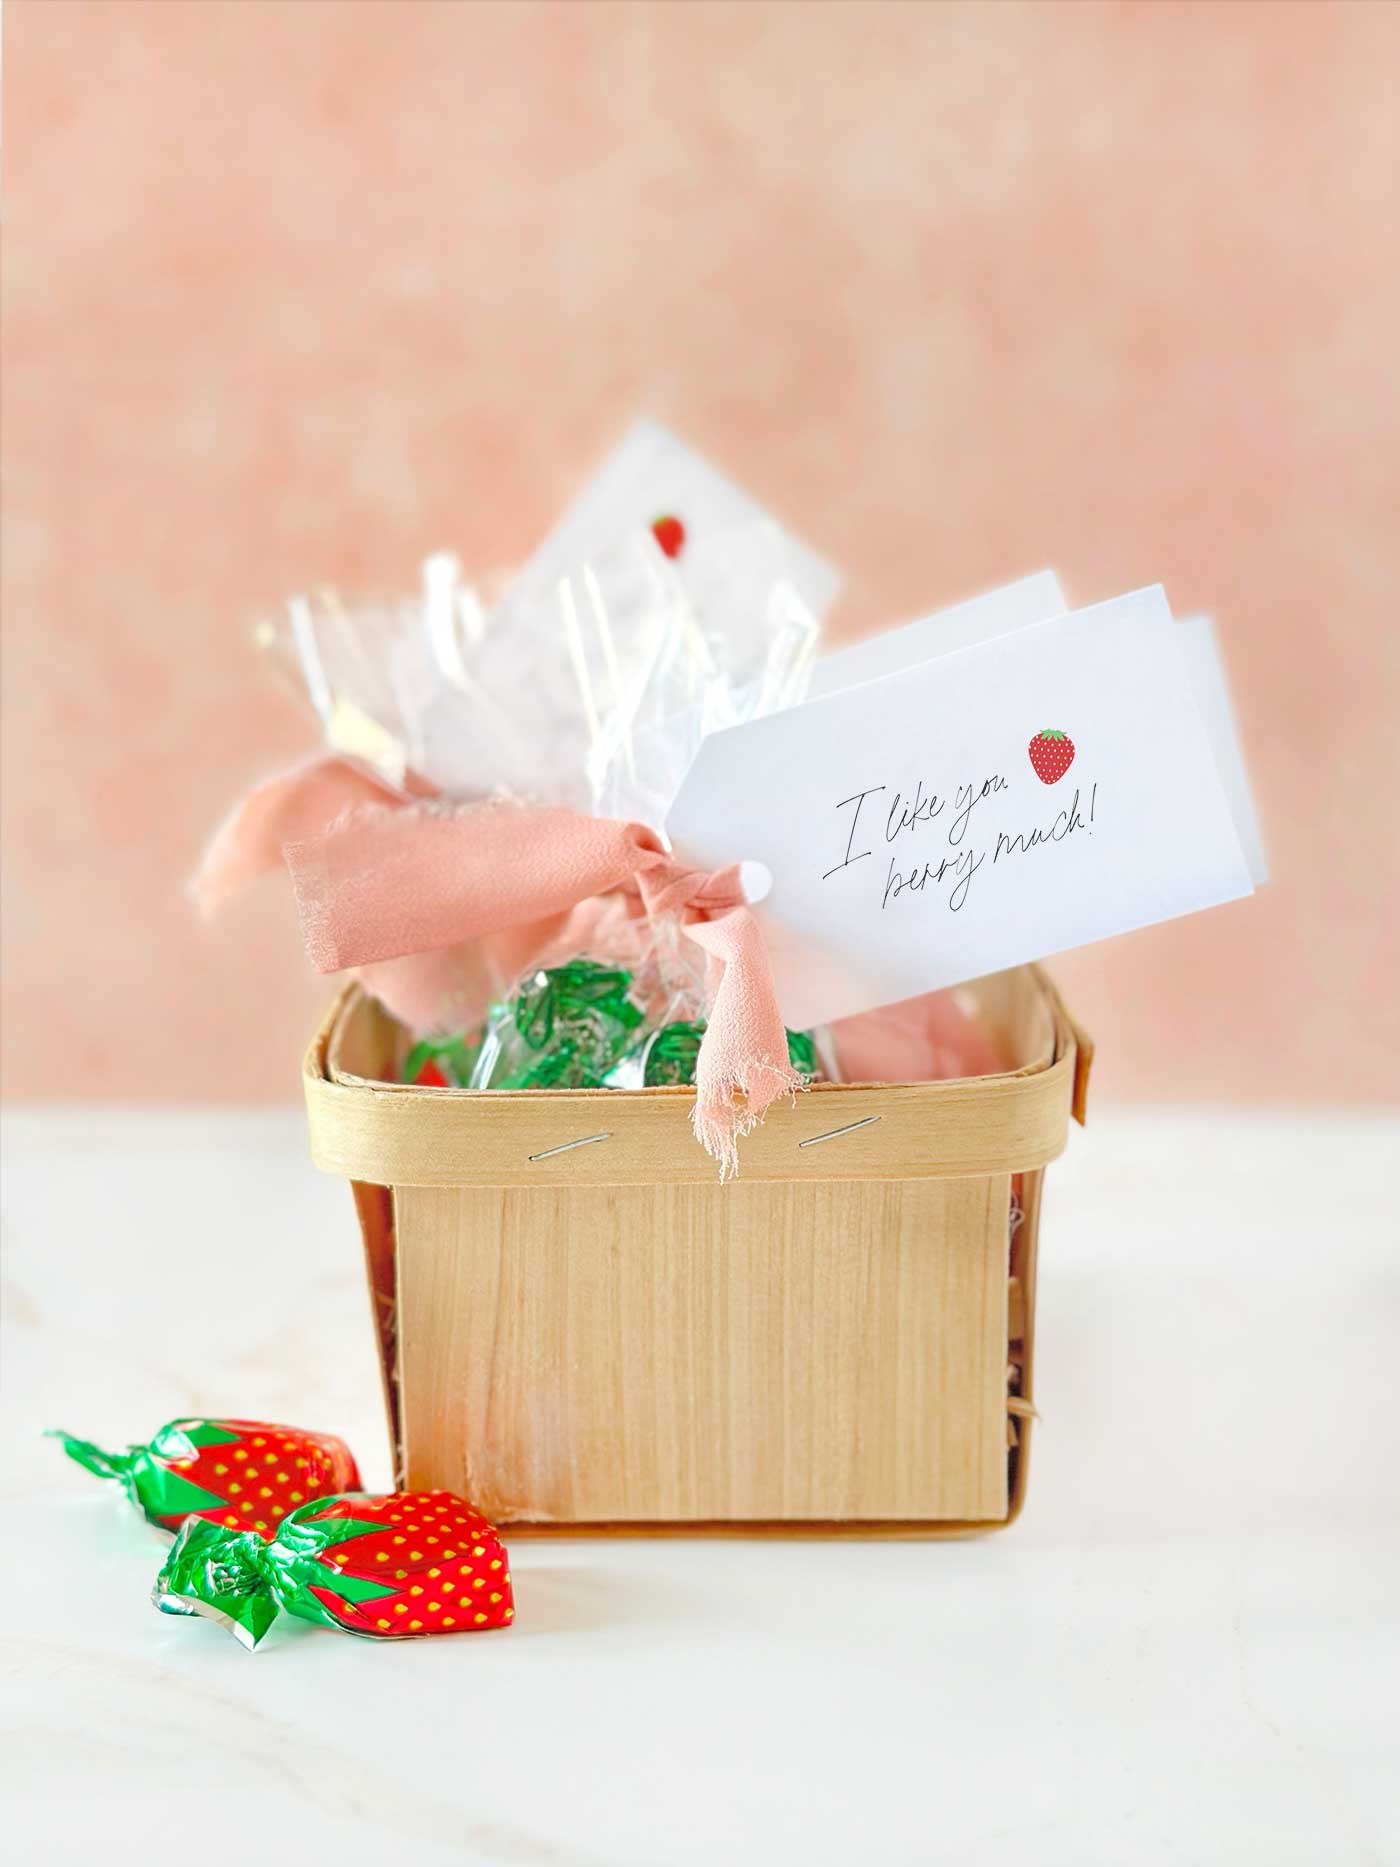 Berry Basket with little candy bags and gift tag